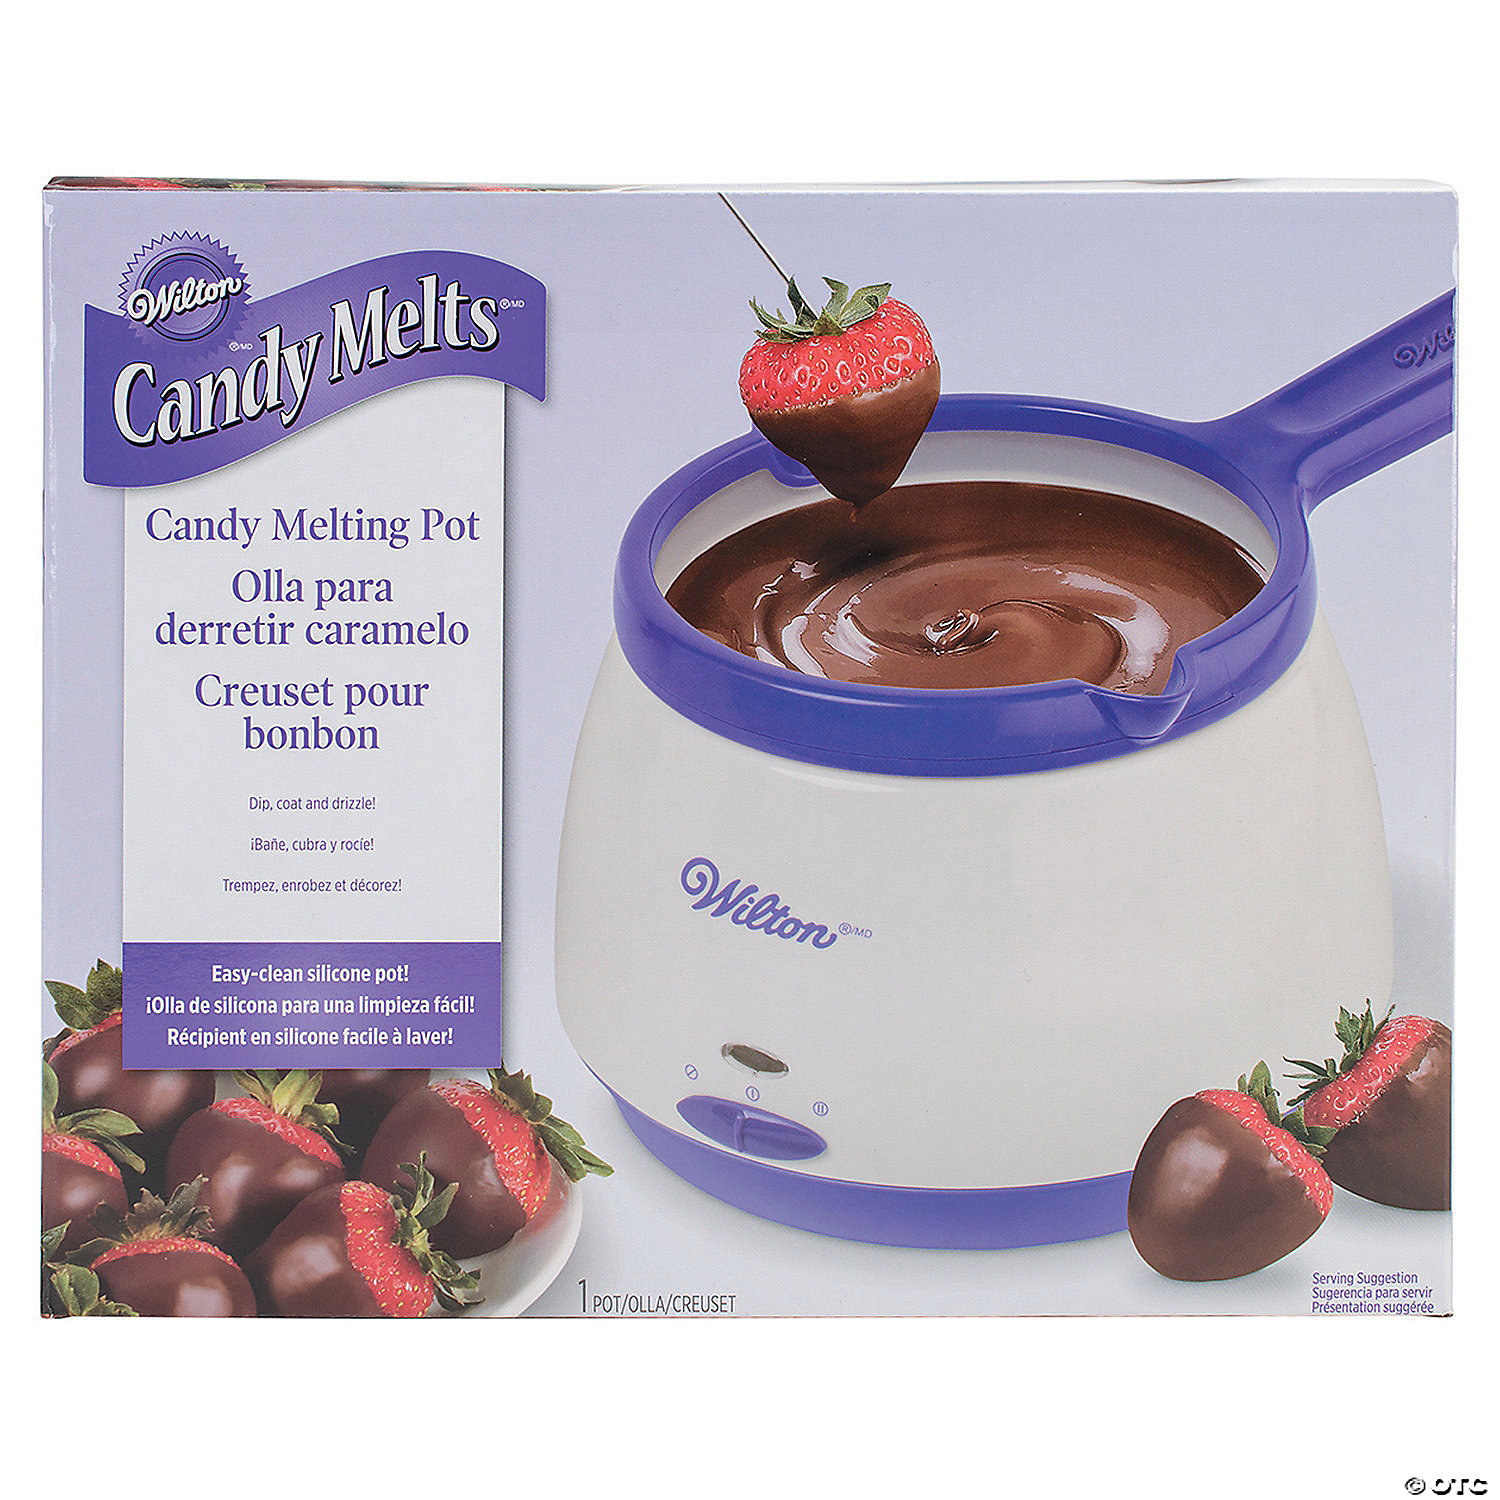 16 Fun Candy Melts Candy Dipping Recipes, Wilton